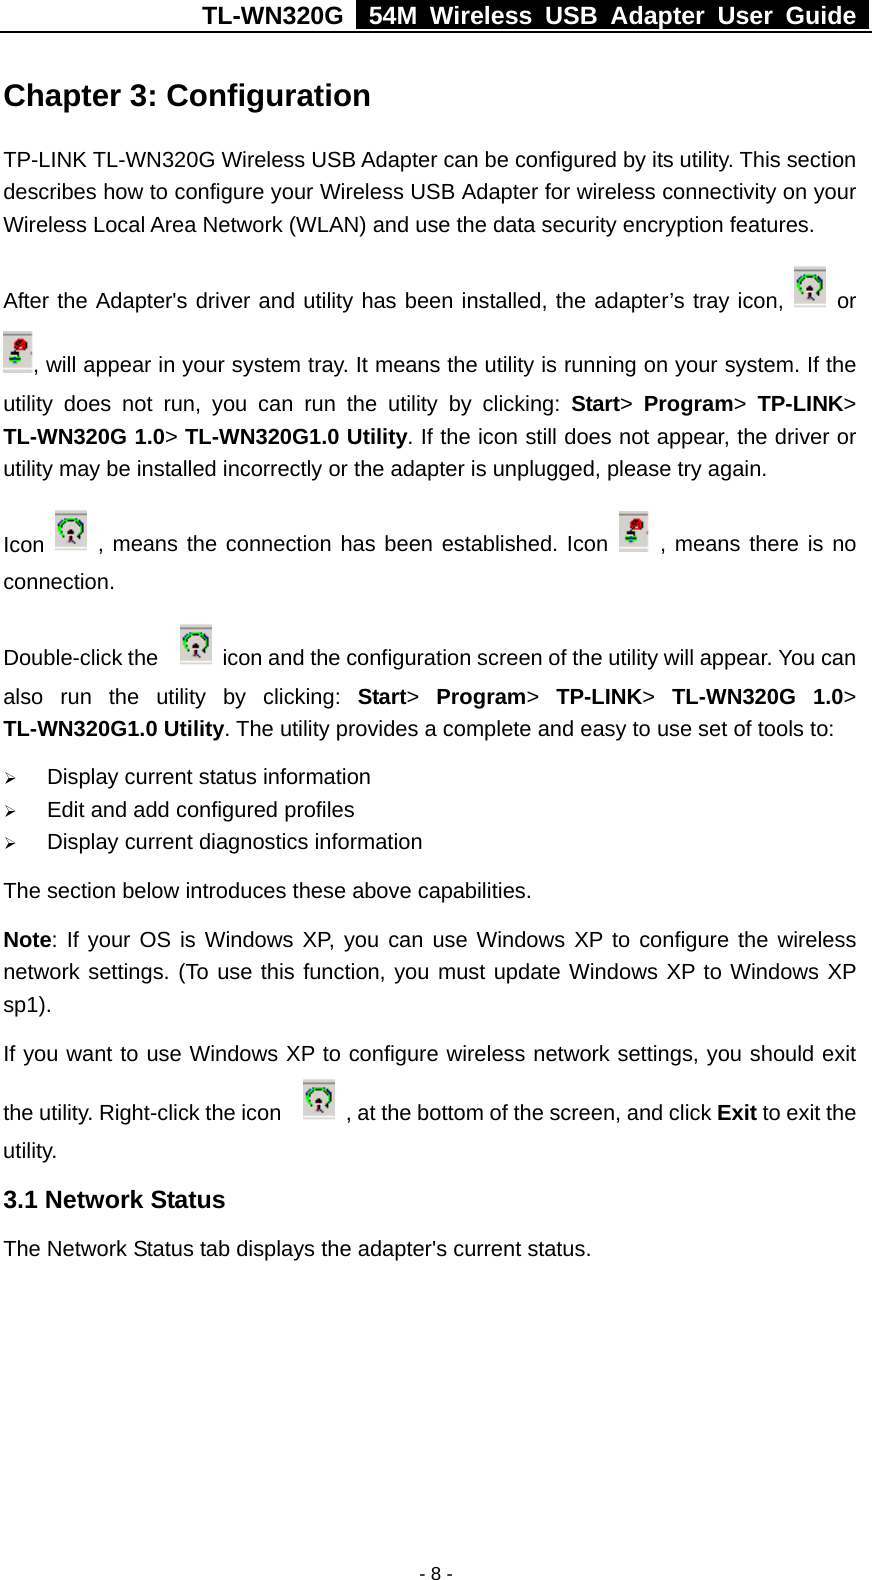 TL-WN320G   54M Wireless USB Adapter User Guide  - 8 - Chapter 3: Configuration TP-LINK TL-WN320G Wireless USB Adapter can be configured by its utility. This section describes how to configure your Wireless USB Adapter for wireless connectivity on your Wireless Local Area Network (WLAN) and use the data security encryption features.   After the Adapter&apos;s driver and utility has been installed, the adapter’s tray icon,   or , will appear in your system tray. It means the utility is running on your system. If the utility does not run, you can run the utility by clicking: Start&gt;  Program&gt;  TP-LINK&gt; TL-WN320G 1.0&gt; TL-WN320G1.0 Utility. If the icon still does not appear, the driver or utility may be installed incorrectly or the adapter is unplugged, please try again.   Icon   , means the connection has been established. Icon   , means there is no connection.  Double-click the      icon and the configuration screen of the utility will appear. You can also run the utility by clicking: Start&gt;  Program&gt;  TP-LINK&gt;  TL-WN320G 1.0&gt; TL-WN320G1.0 Utility. The utility provides a complete and easy to use set of tools to: ¾ Display current status information ¾ Edit and add configured profiles ¾ Display current diagnostics information The section below introduces these above capabilities. Note: If your OS is Windows XP, you can use Windows XP to configure the wireless network settings. (To use this function, you must update Windows XP to Windows XP sp1). If you want to use Windows XP to configure wireless network settings, you should exit the utility. Right-click the icon      , at the bottom of the screen, and click Exit to exit the utility. 3.1 Network Status The Network Status tab displays the adapter&apos;s current status.   